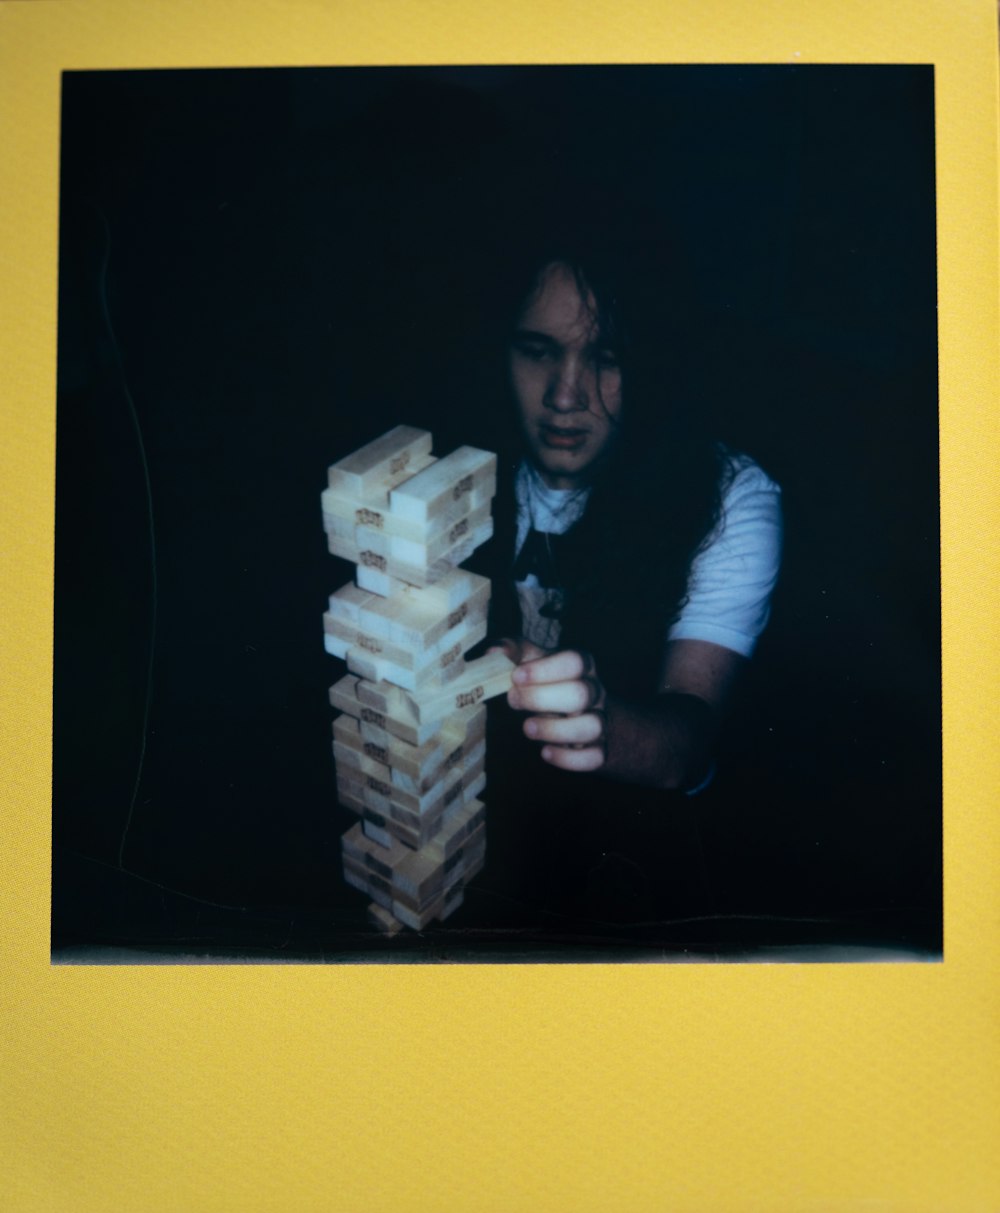 a man is playing with a stack of blocks